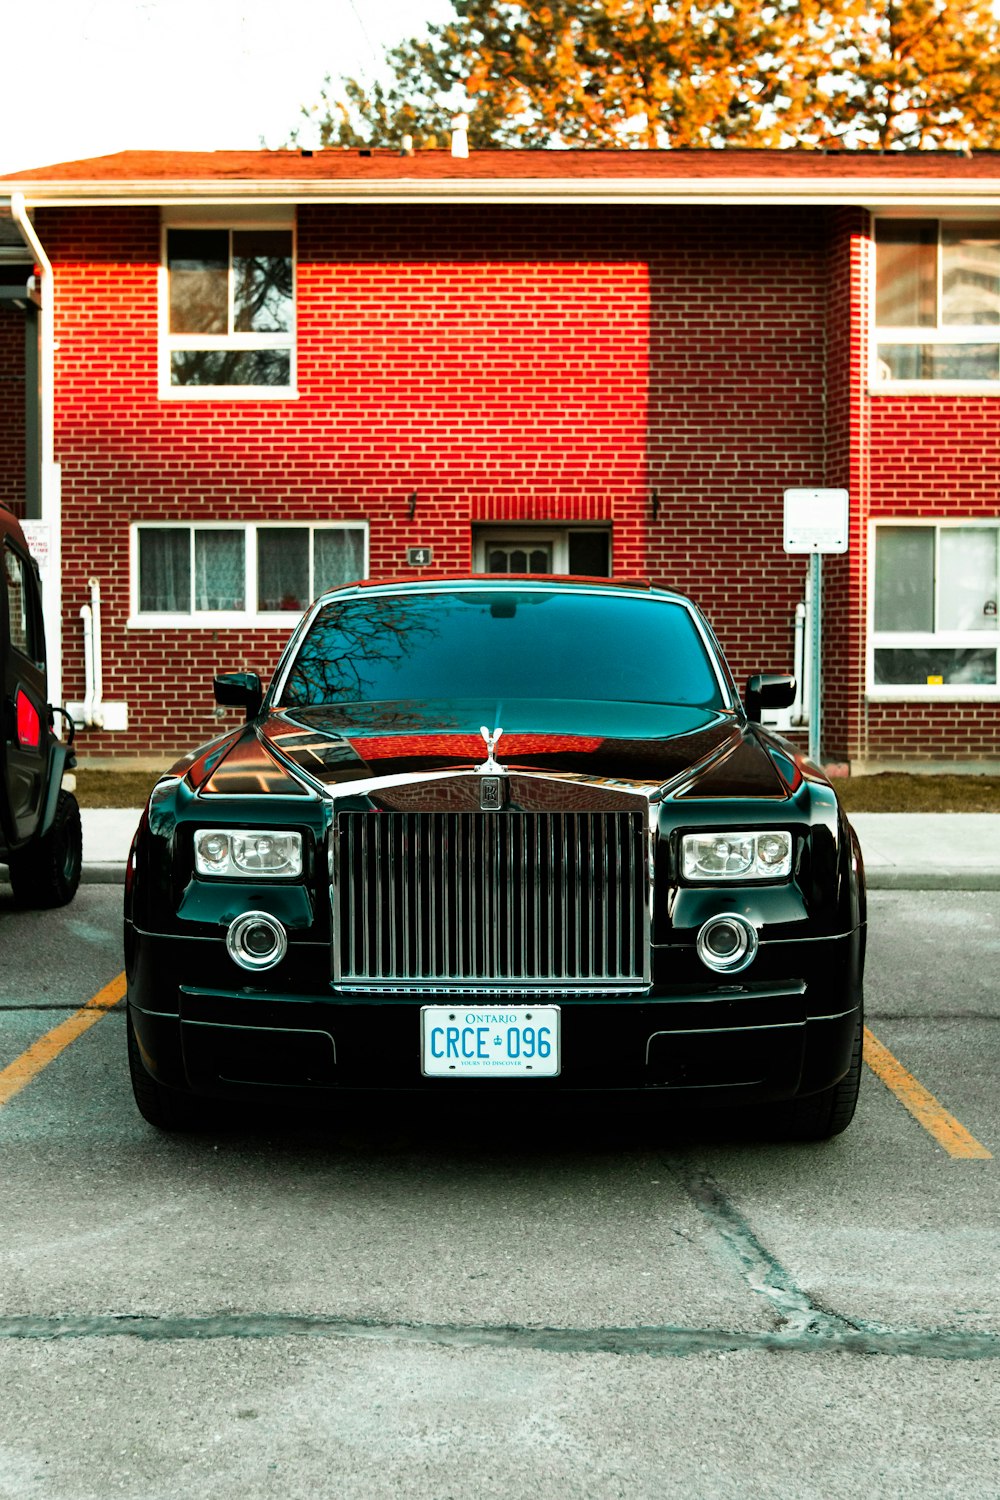 a rolls royce parked in front of a red brick building